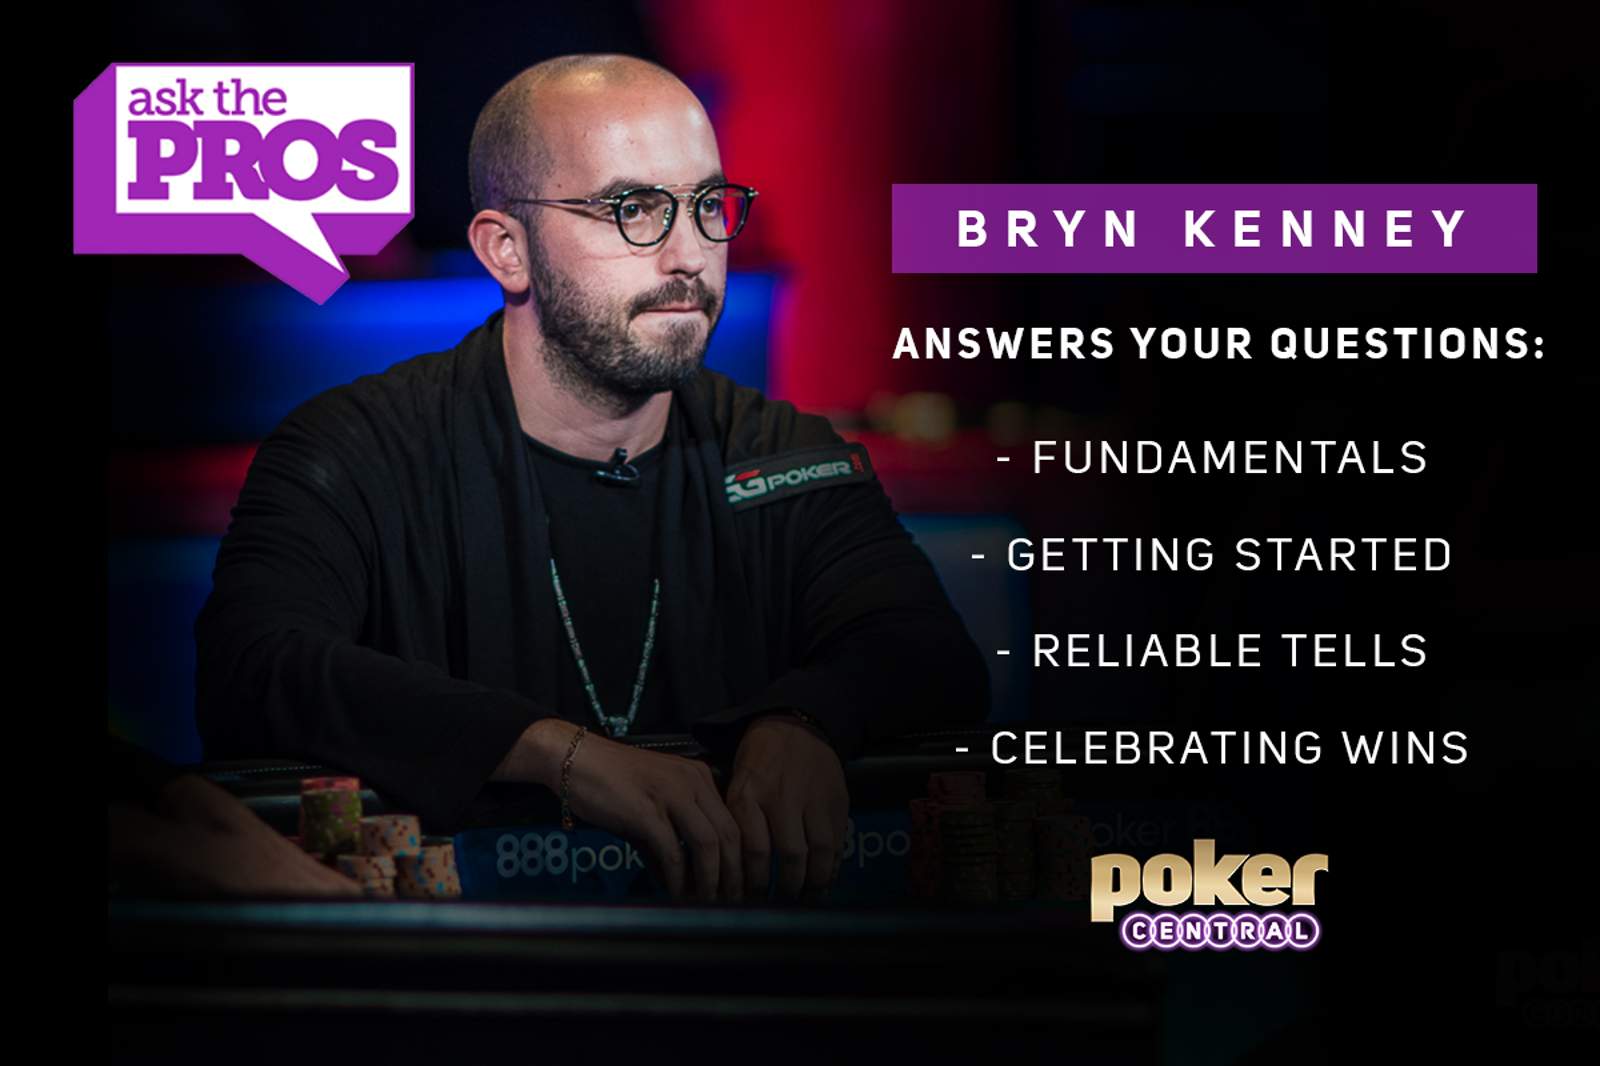 You Asked, Bryn Kenney Answers!